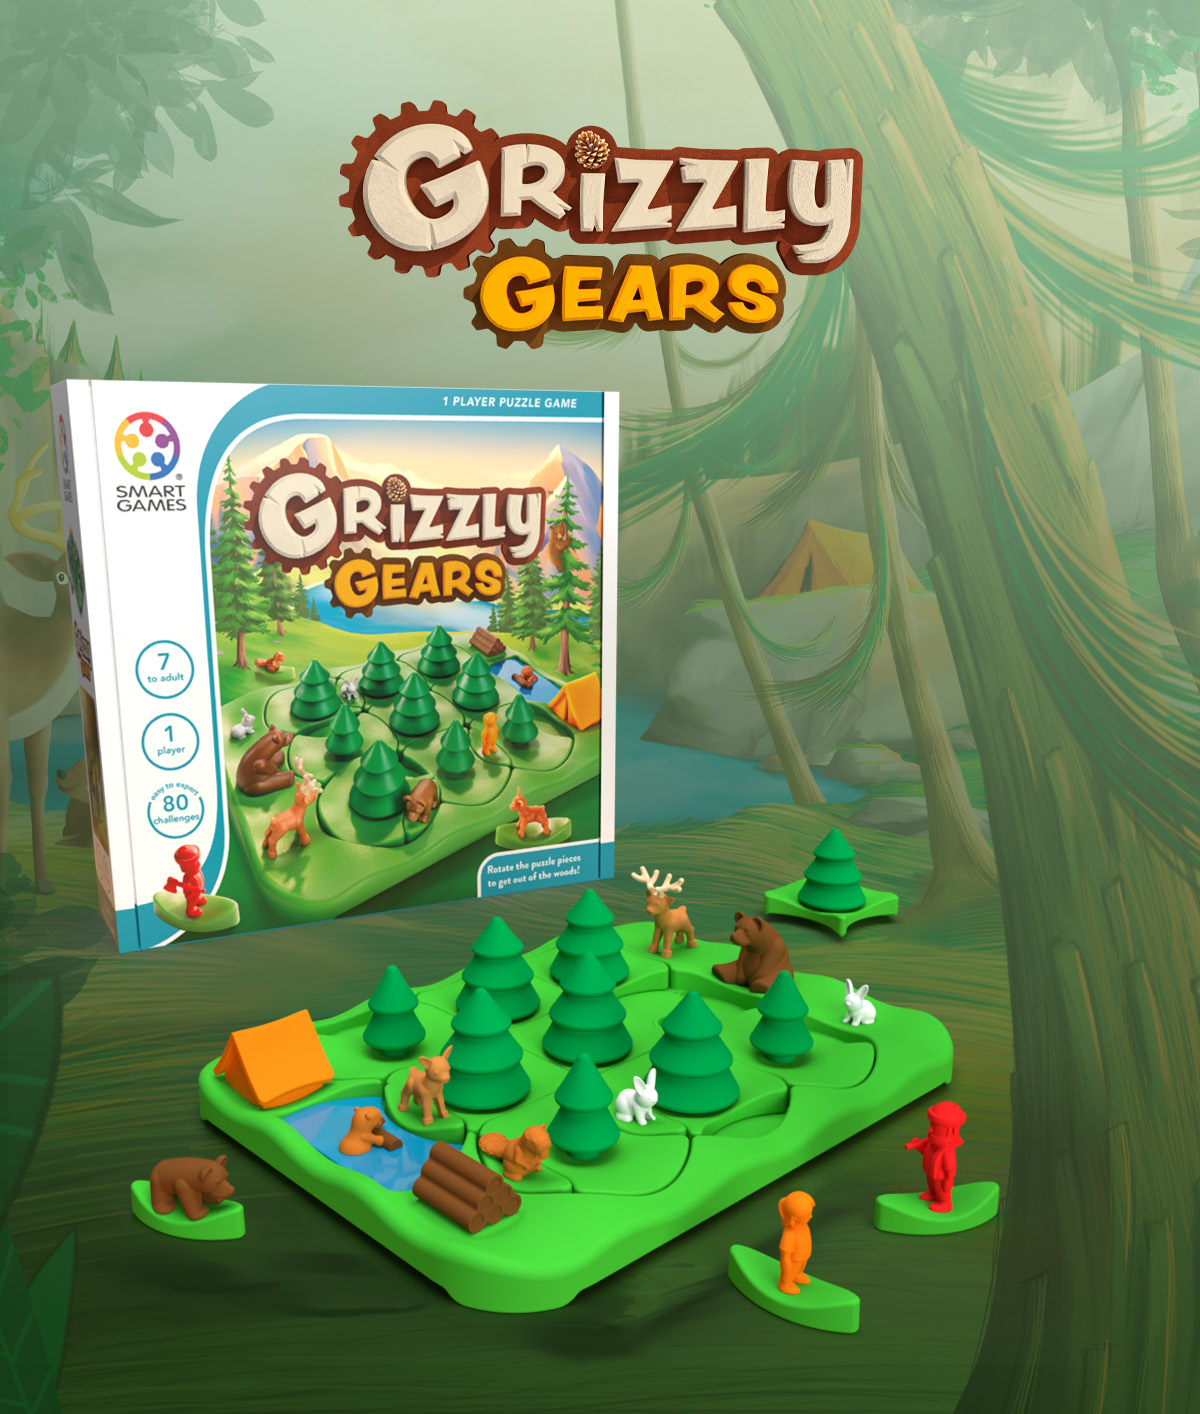 Our latest free online game is now available - SmartGames